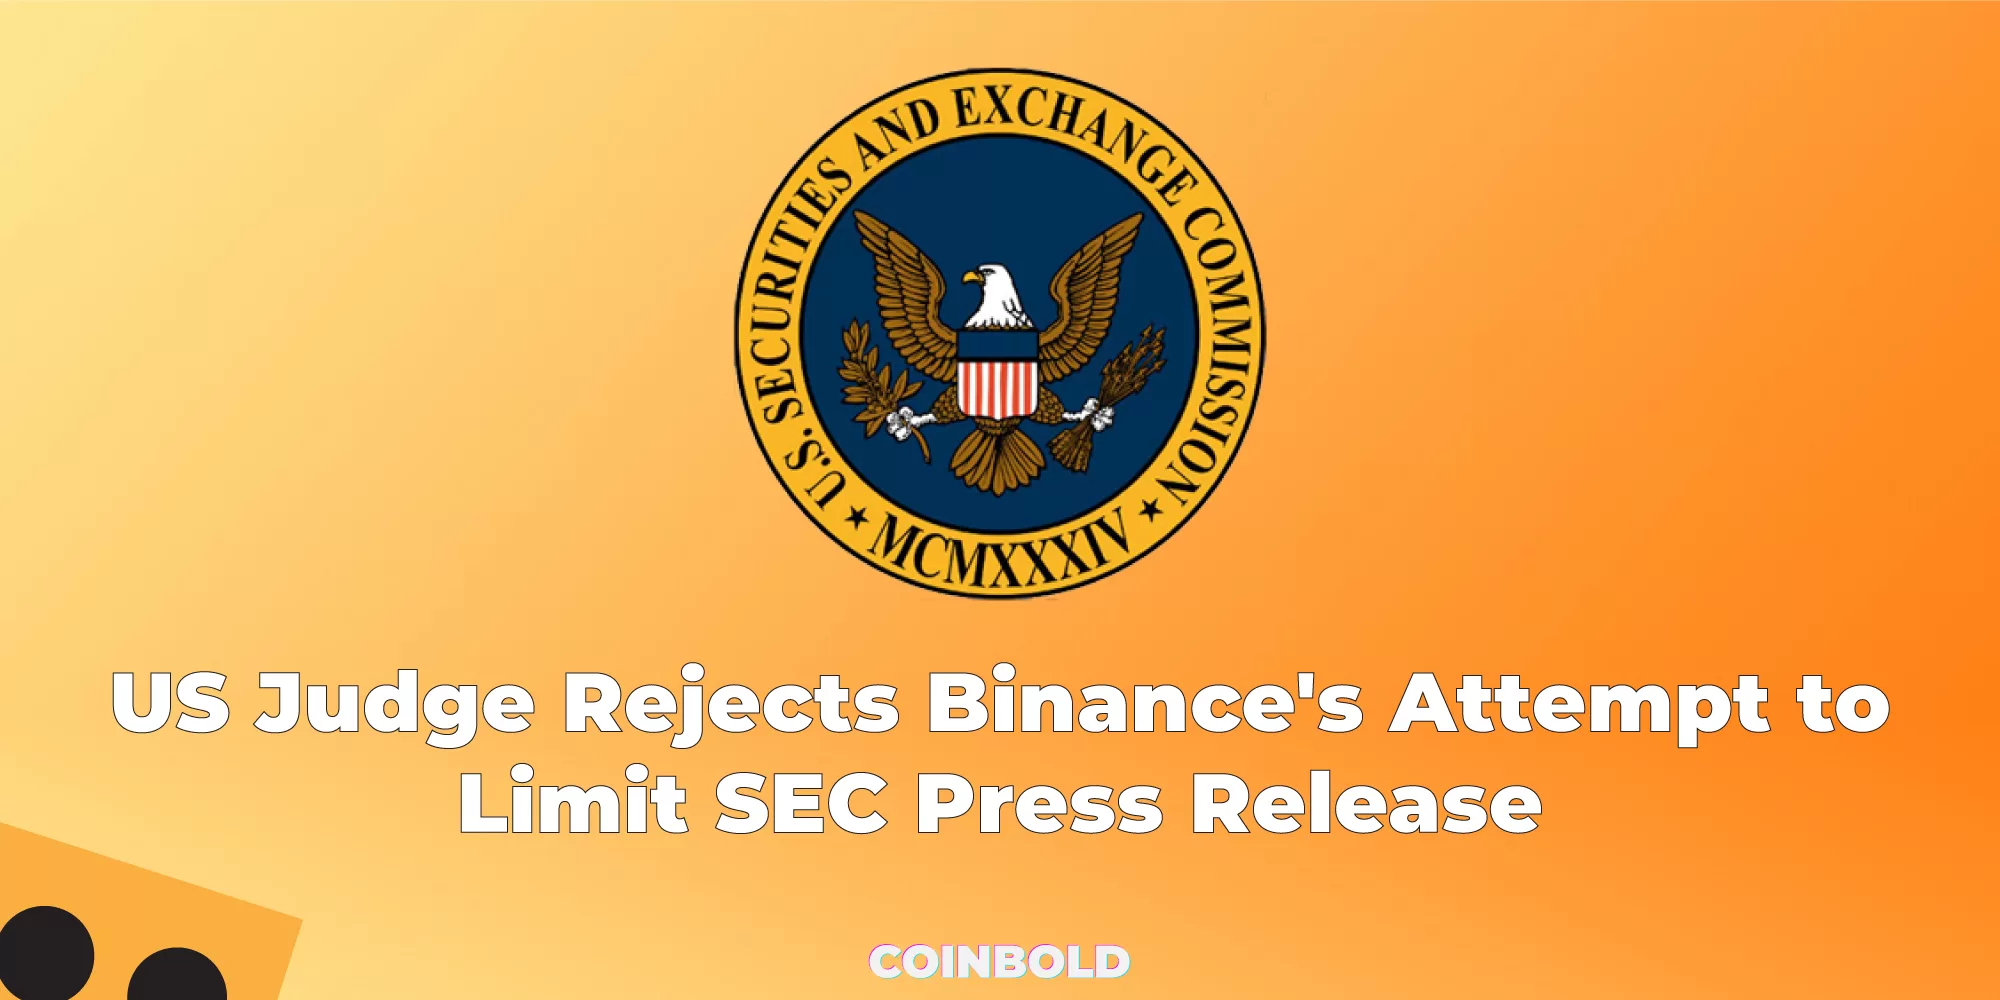 US Judge Rejects Binance's Attempt to Limit SEC Press Release